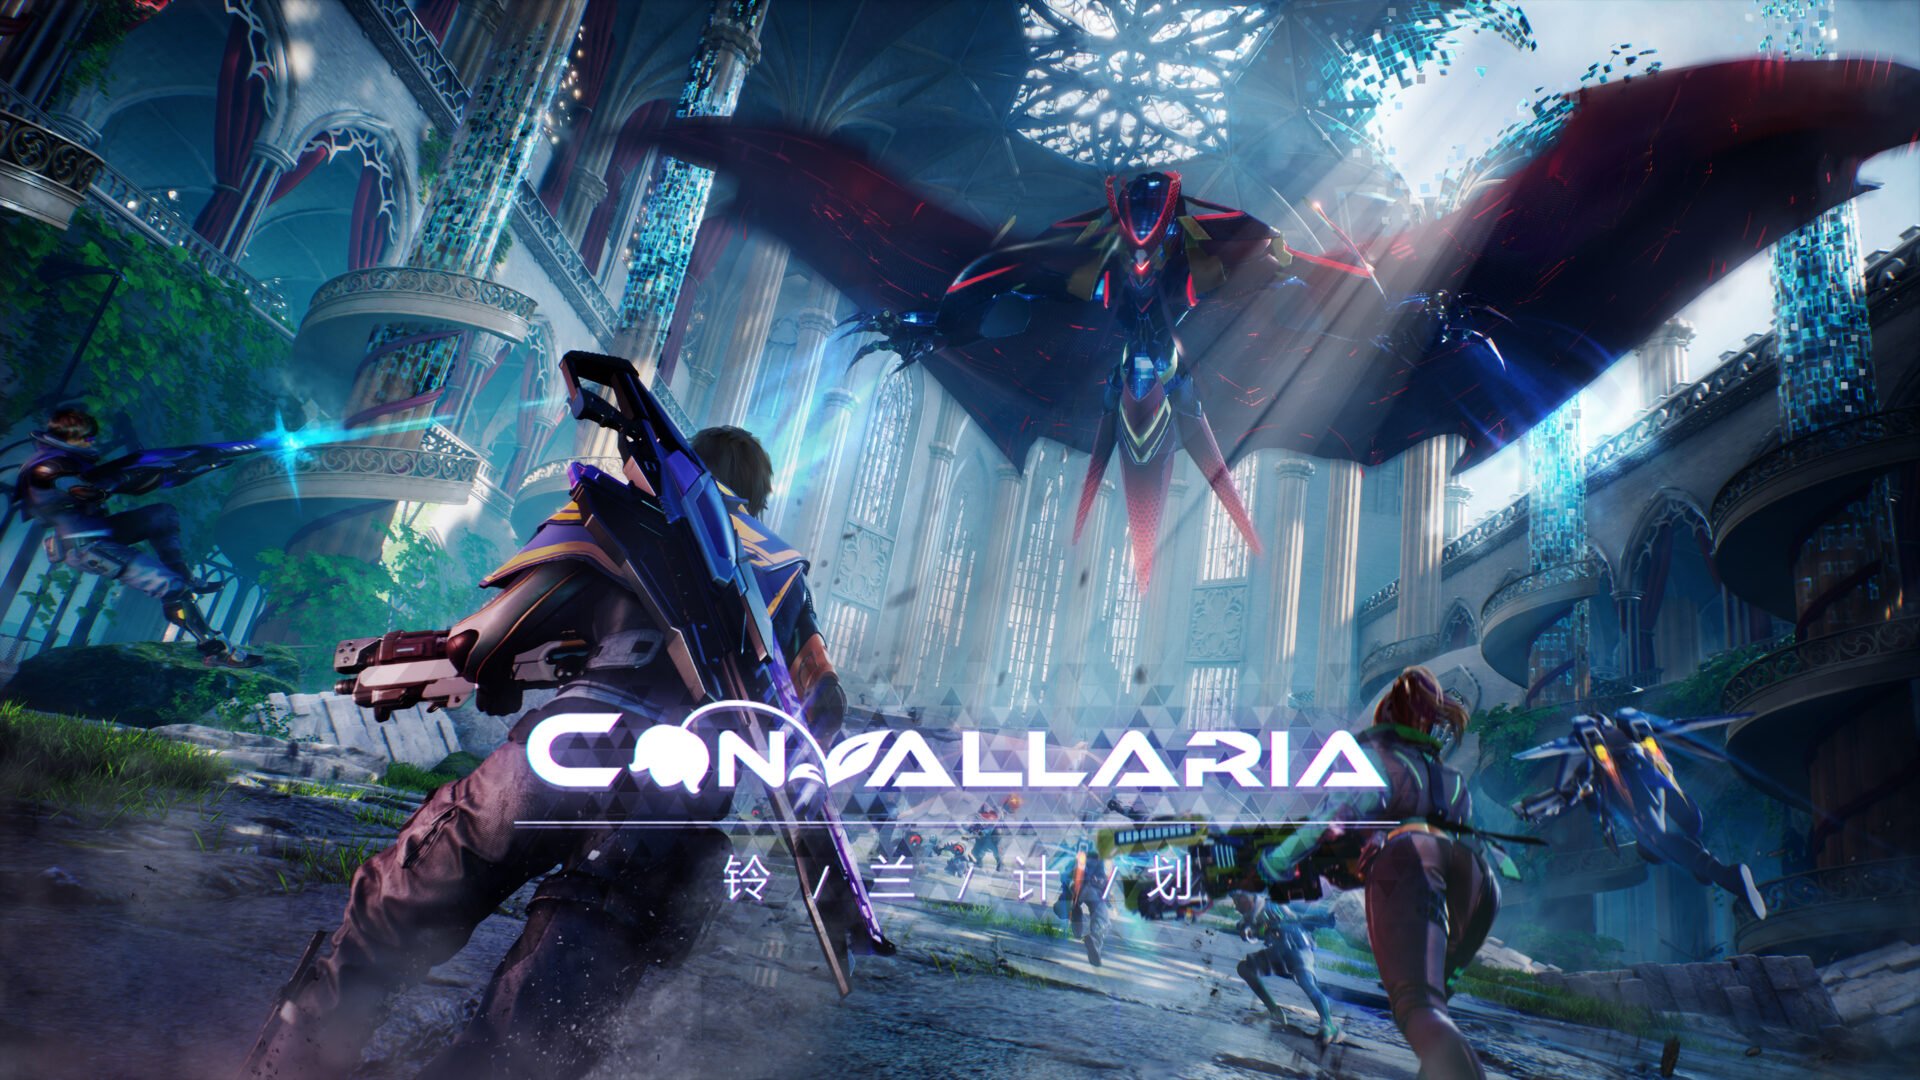 Convallaria to be published by Sony Interactive Entertainment